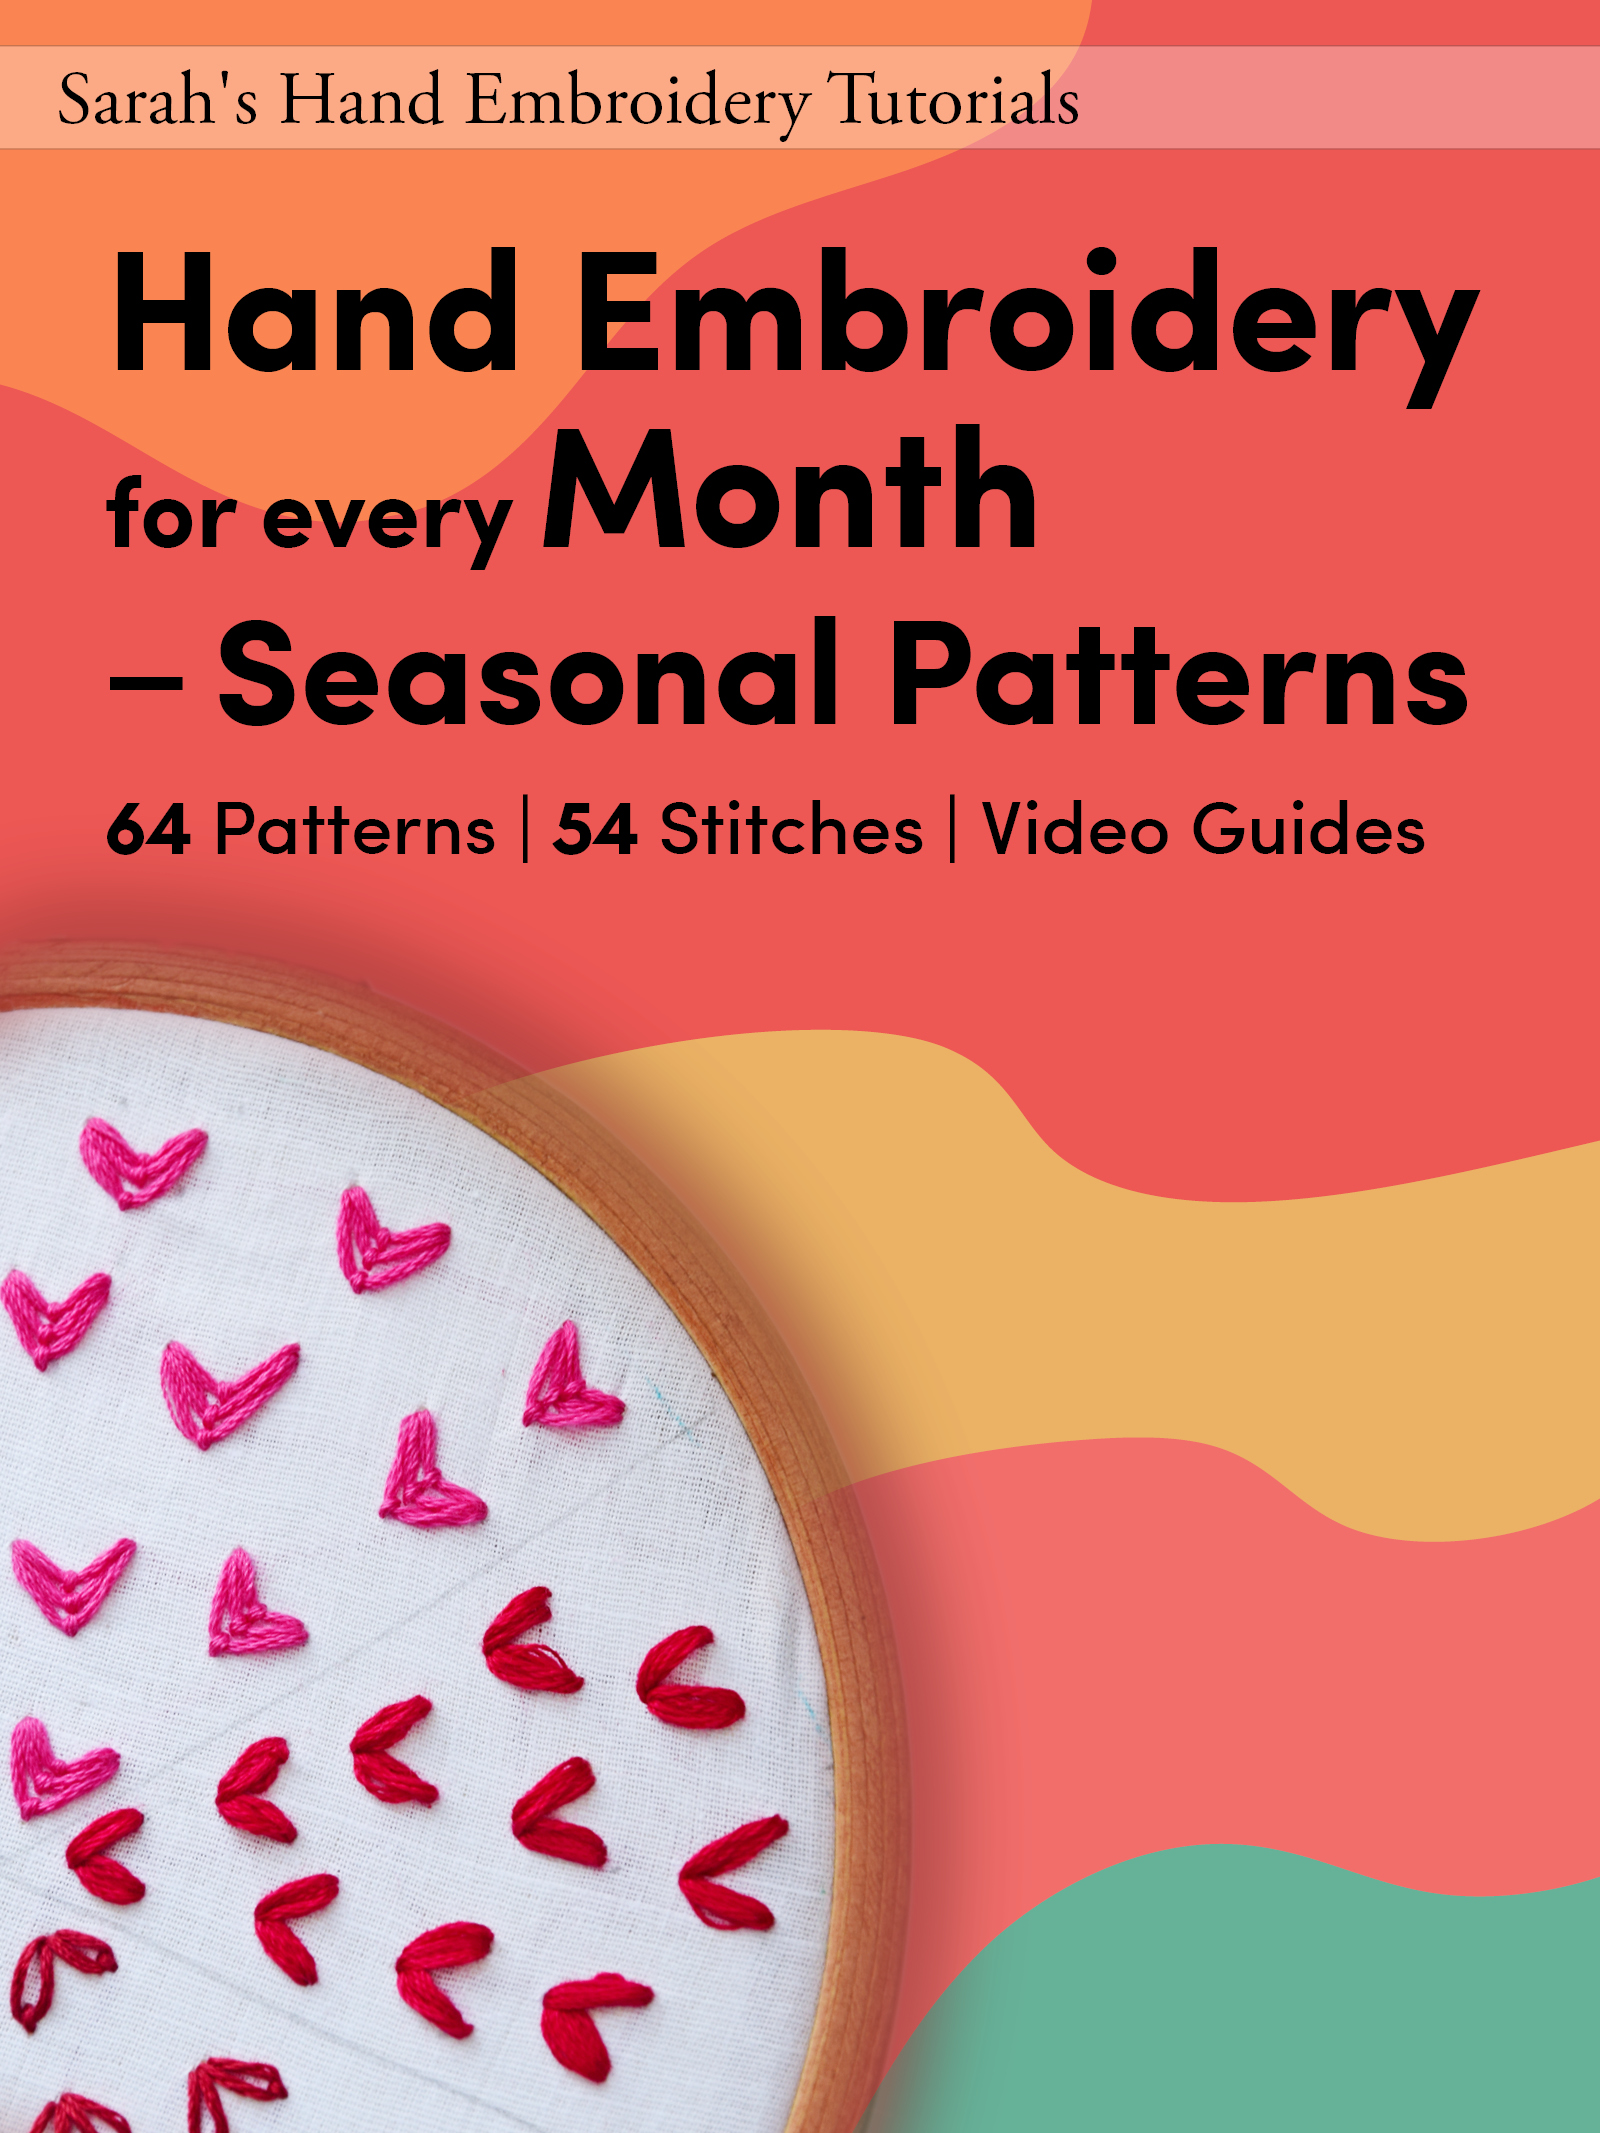 Hand Embroidery for Left Handers: A step-by-step pictorial guide to 150  embroidery stitches with printable patterns, tips, techniques and more